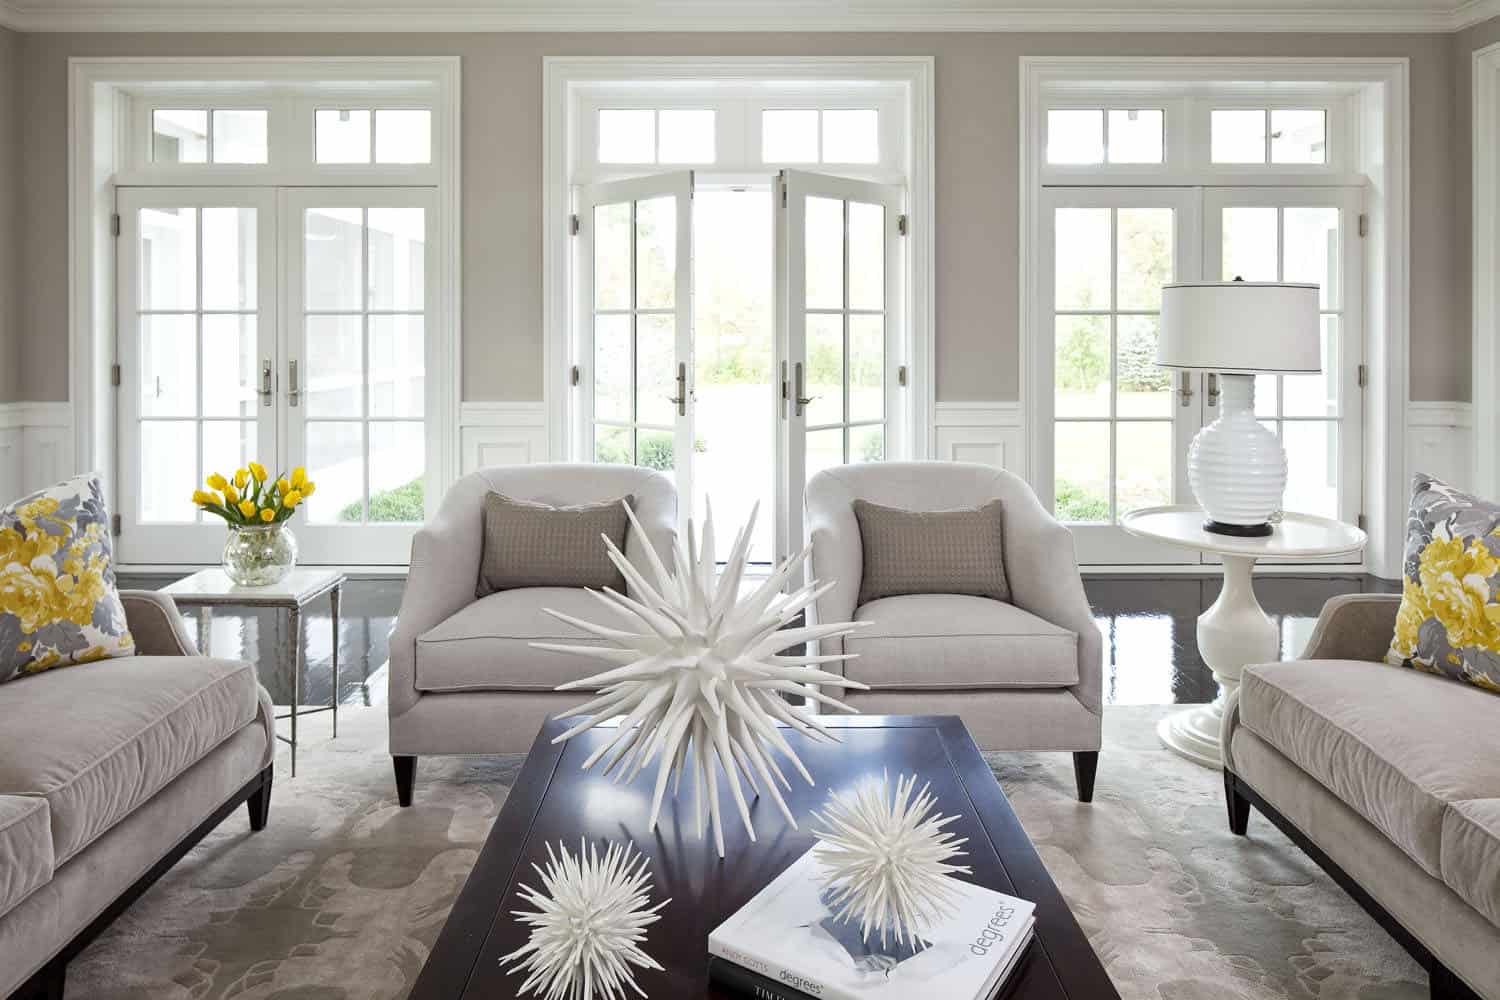 Taupe can be used in more than just one way.